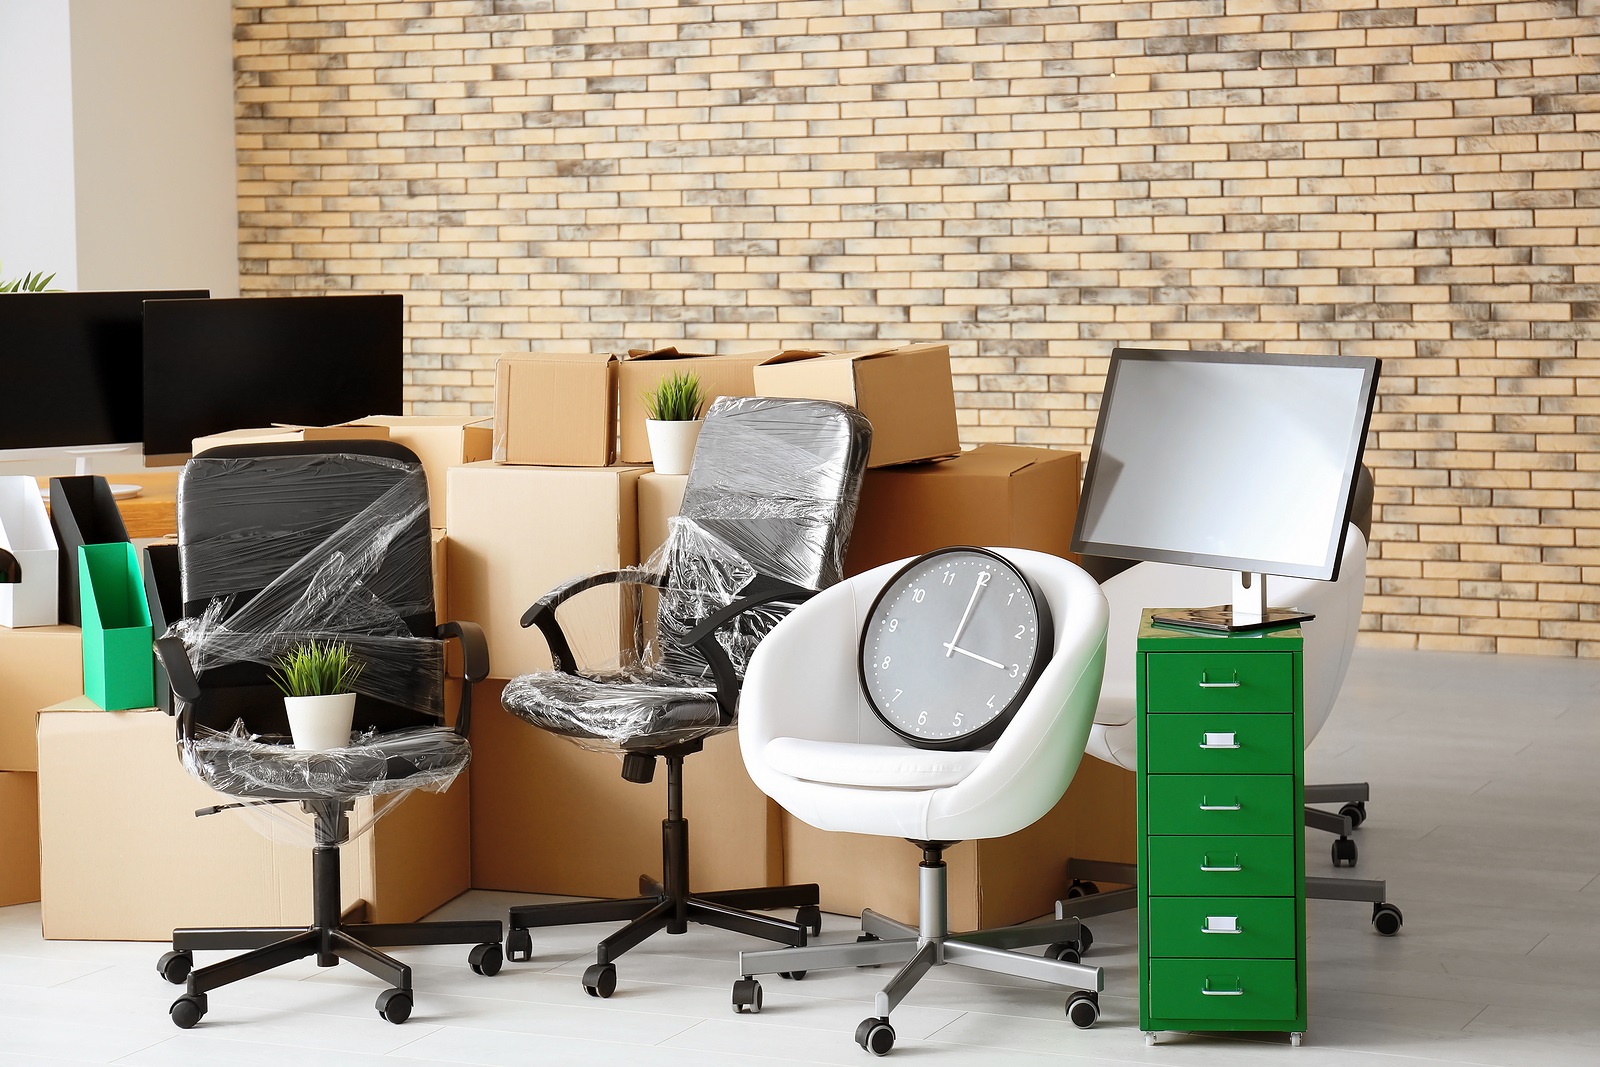 How to prepare your office for a move